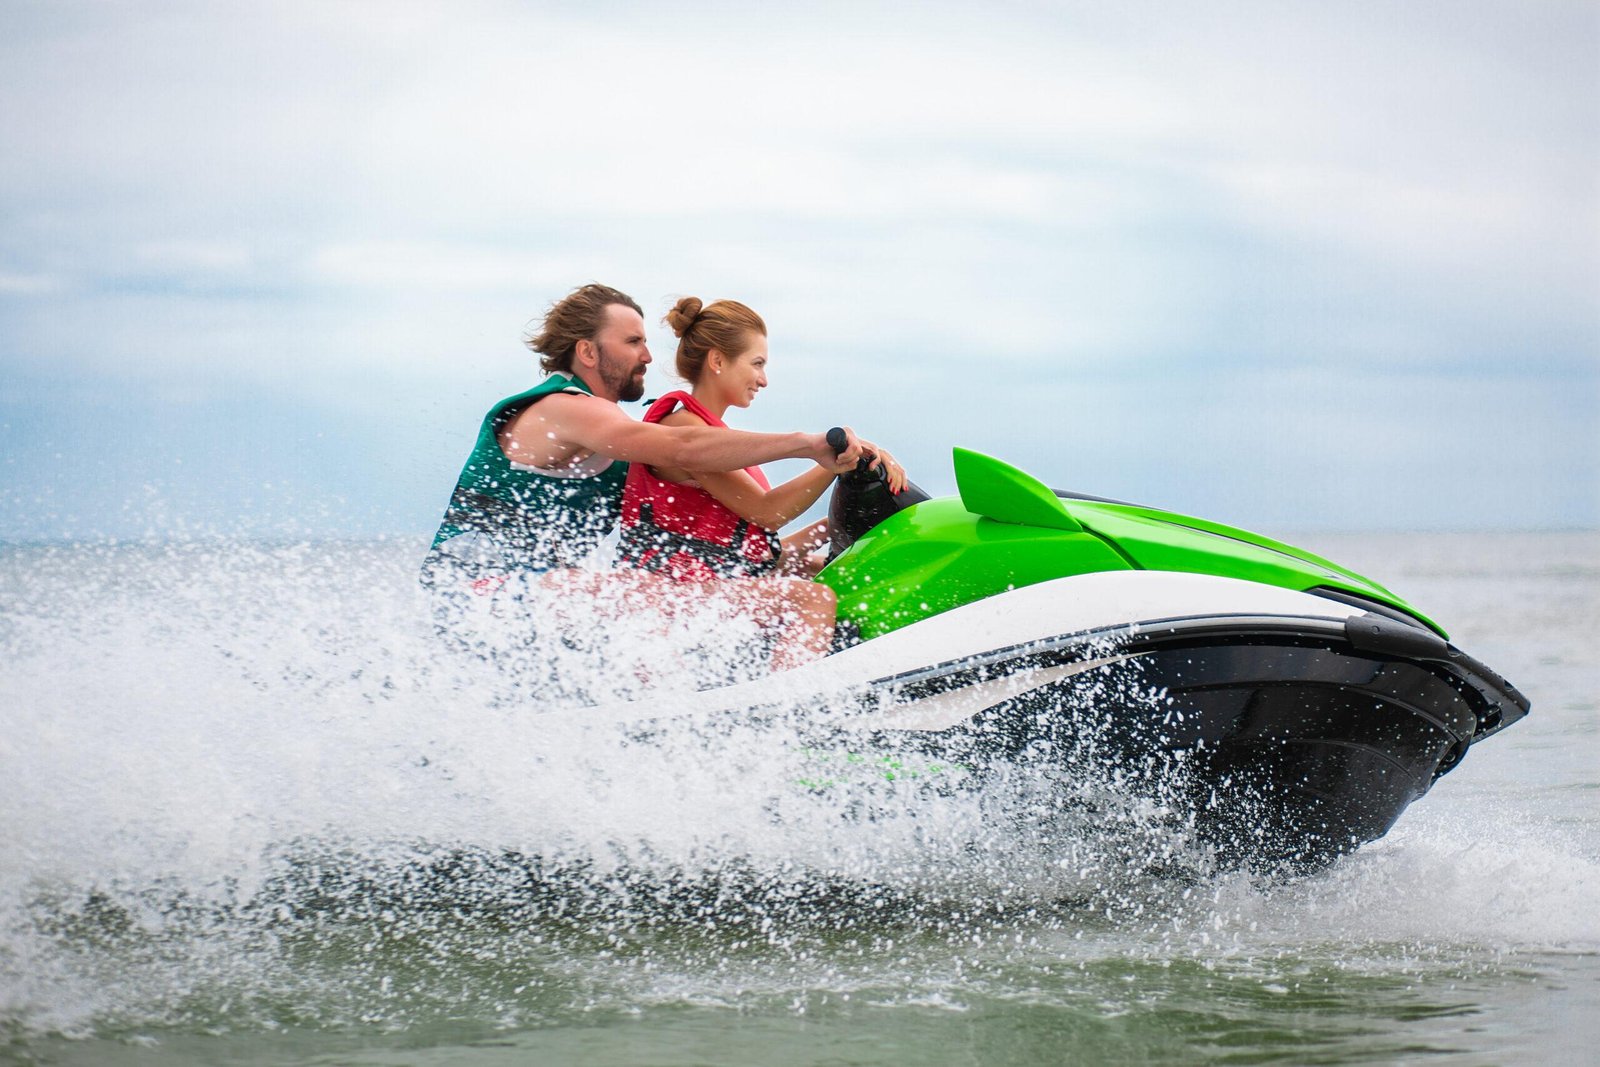 Top 5 Water Sports Rentals to Try in Dubai